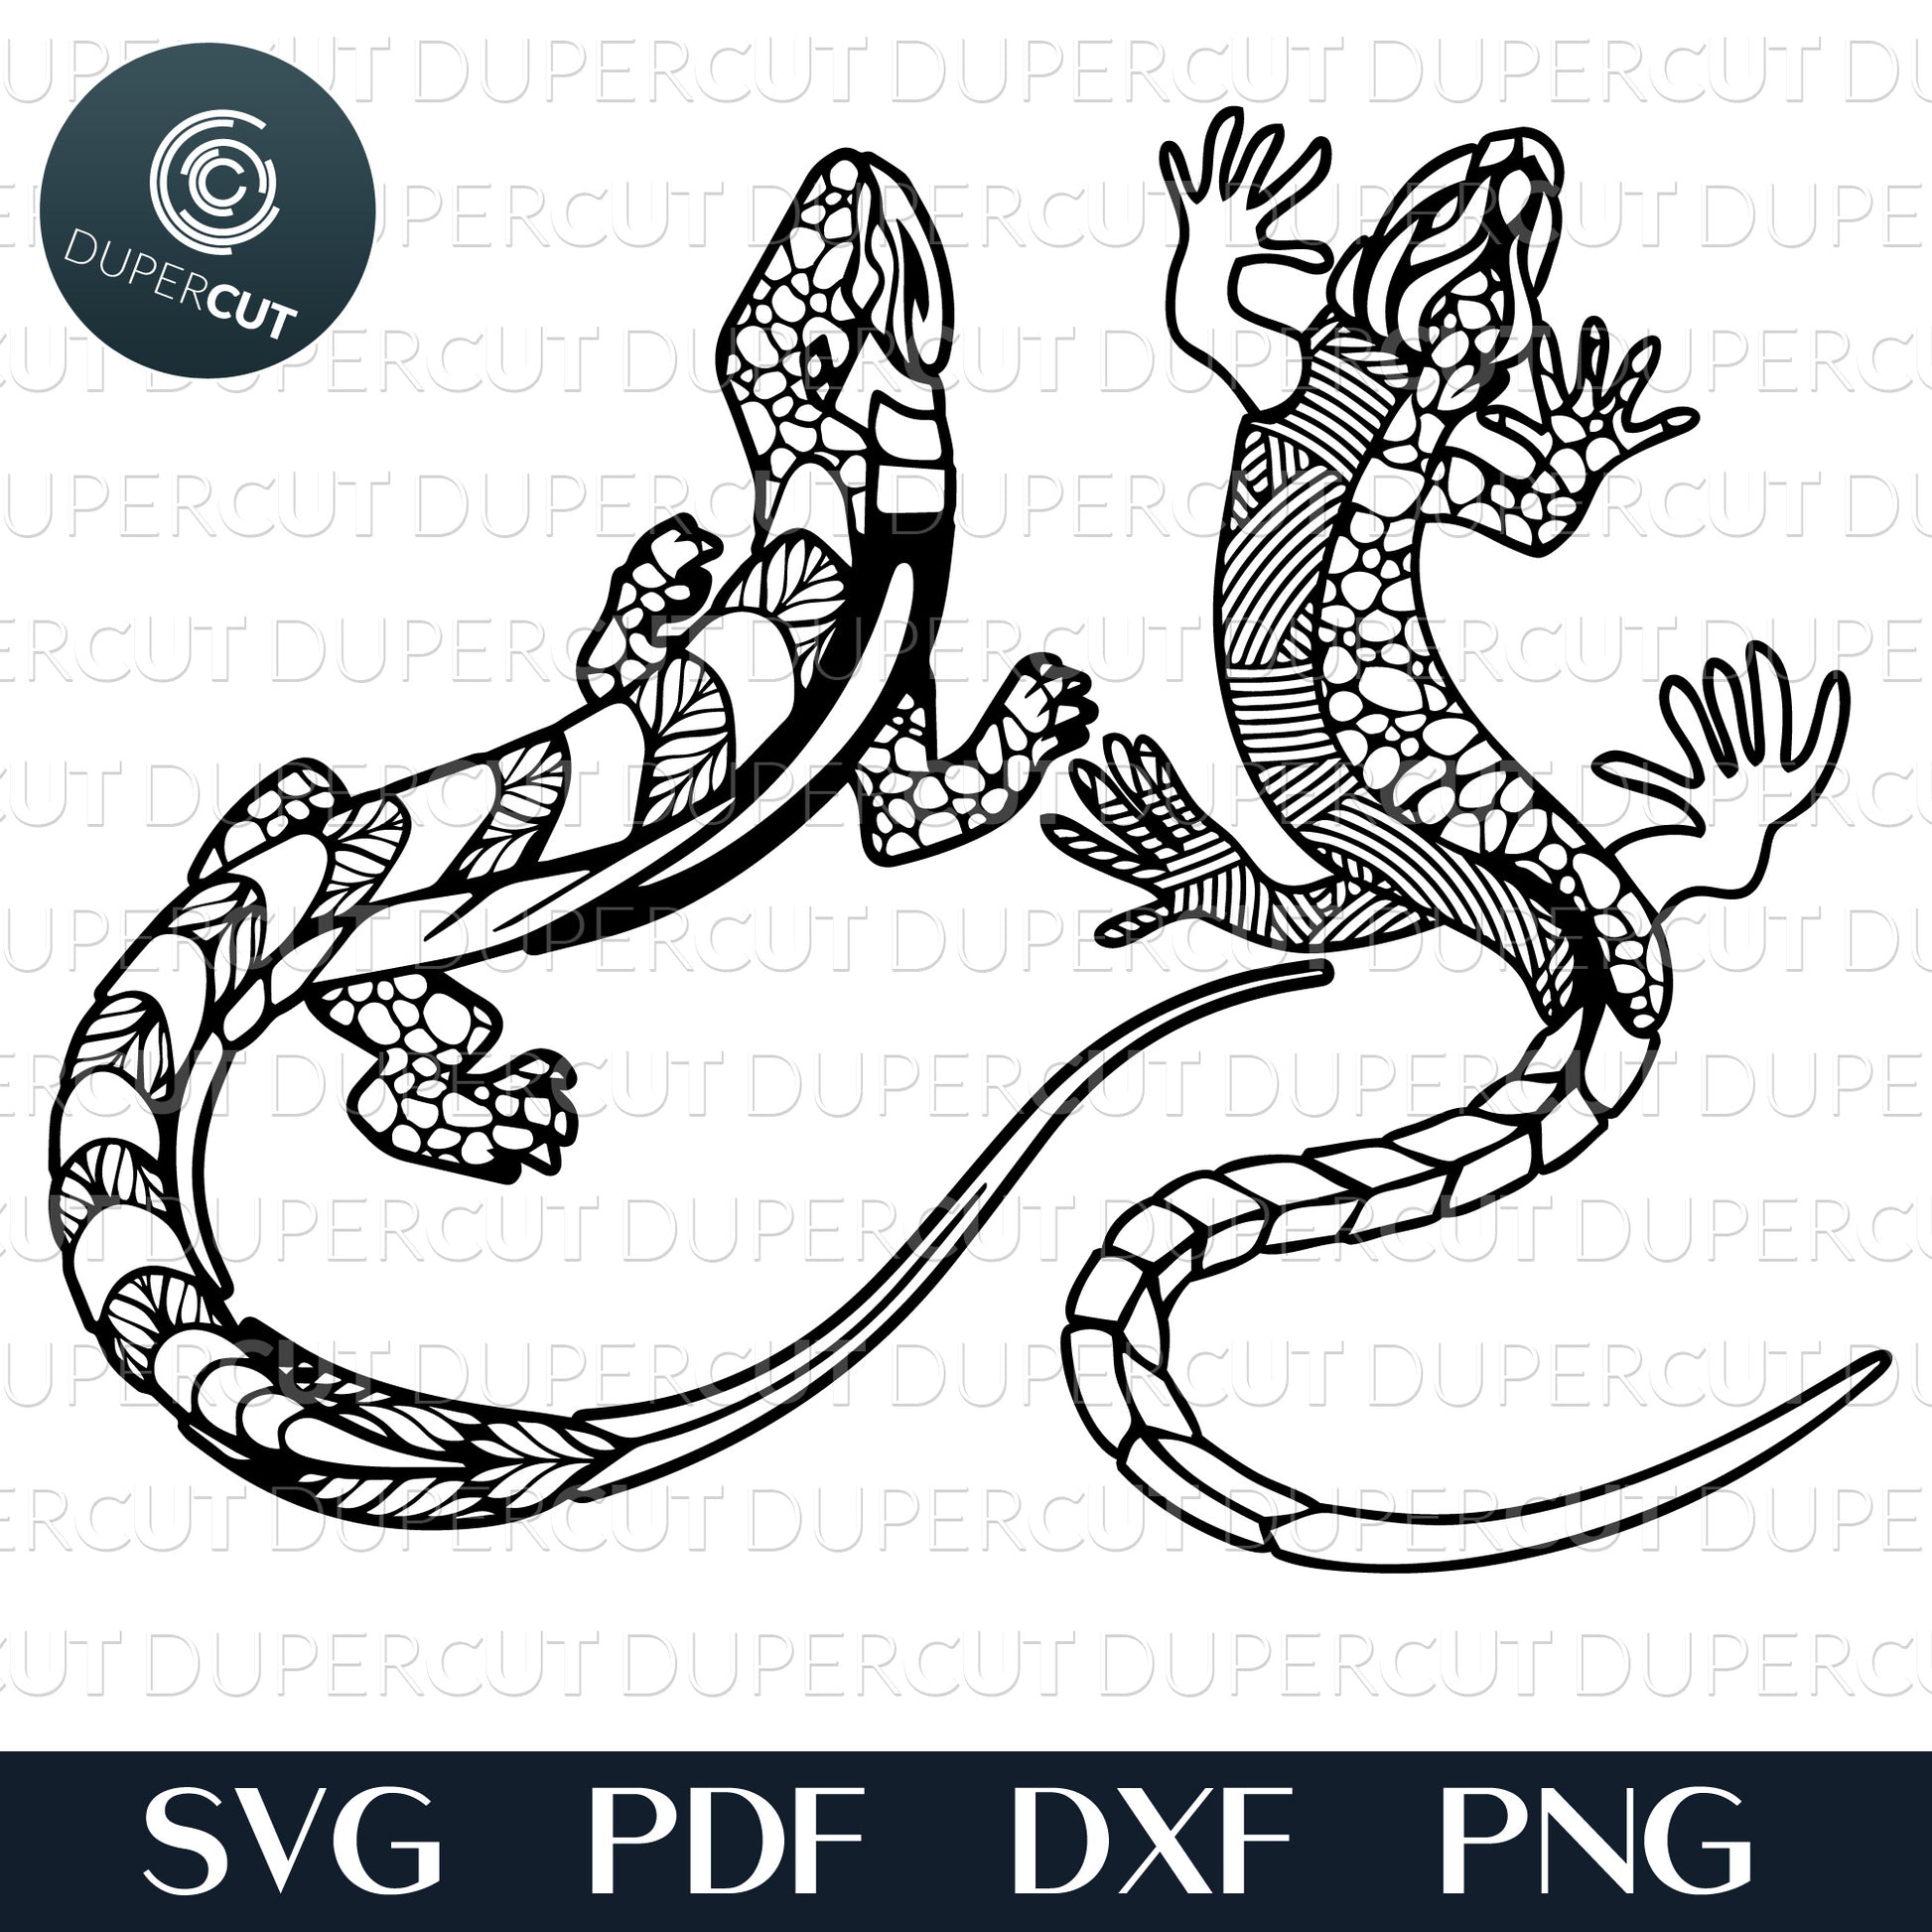 Gecko lizard silhouette line art. SVG PNG DXF files for cutting, laser engraving, scrapbooking. For use with Cricut, Glowforge, Silhouette, CNC machines.